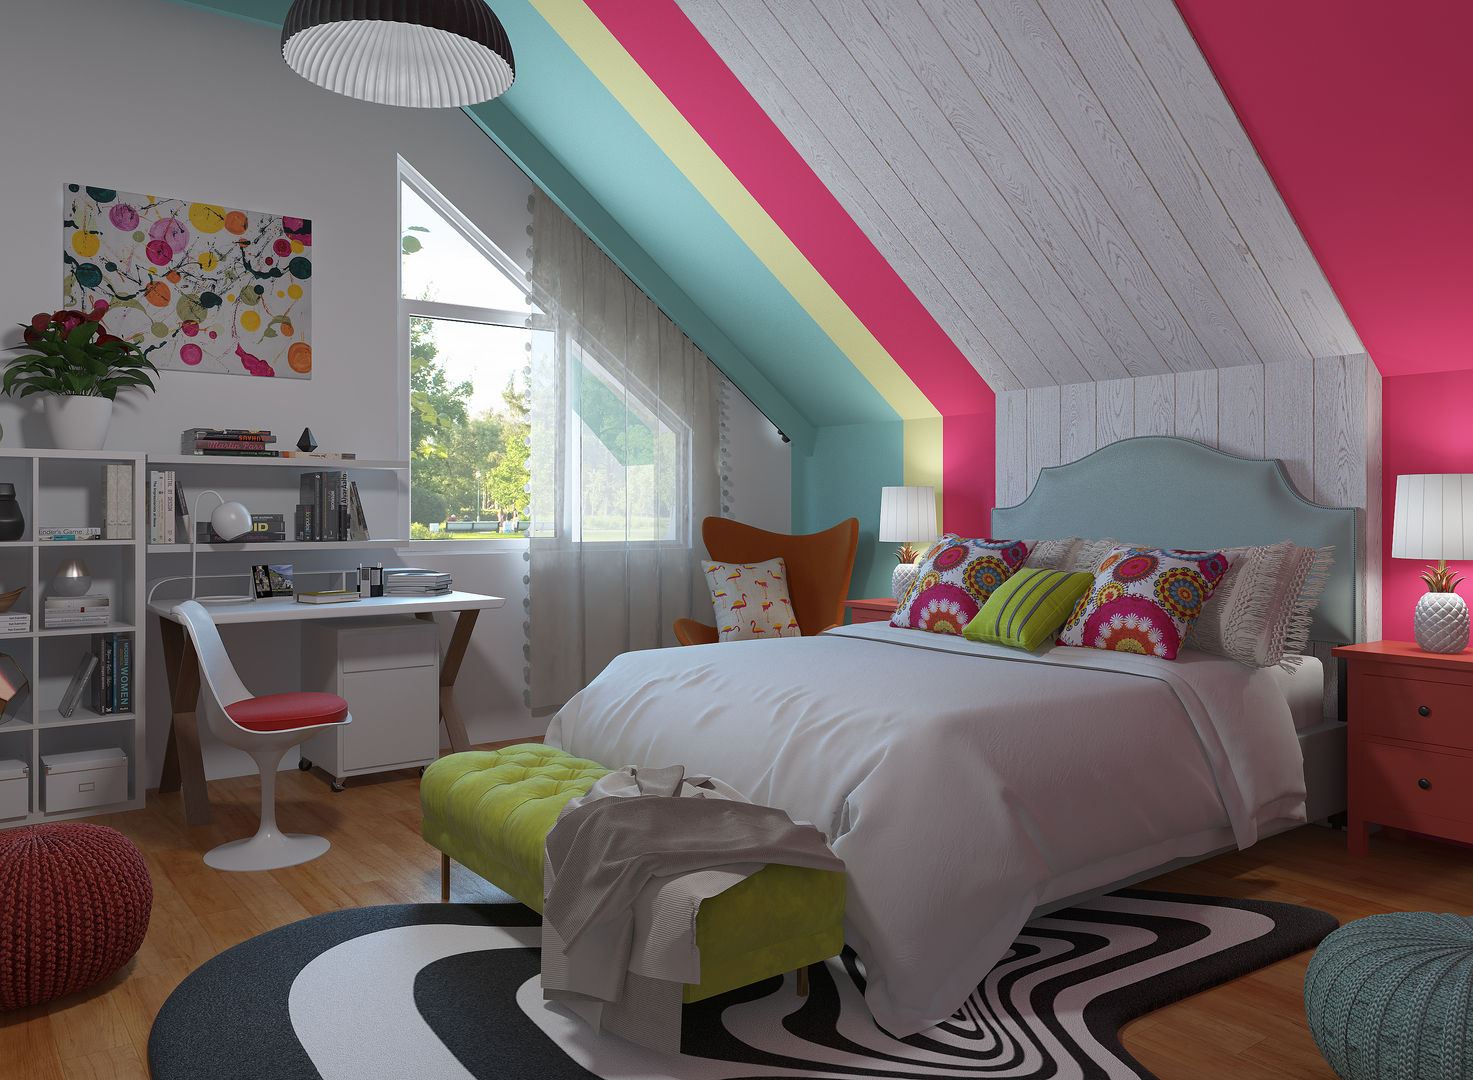 Eclectic -Pop Art decoration homify Спальня bedroom,decorate bedroom,how to decorate,pop art style,pop art bedroom,3d design,interior design,rendering,home deco,colourful,customized designs